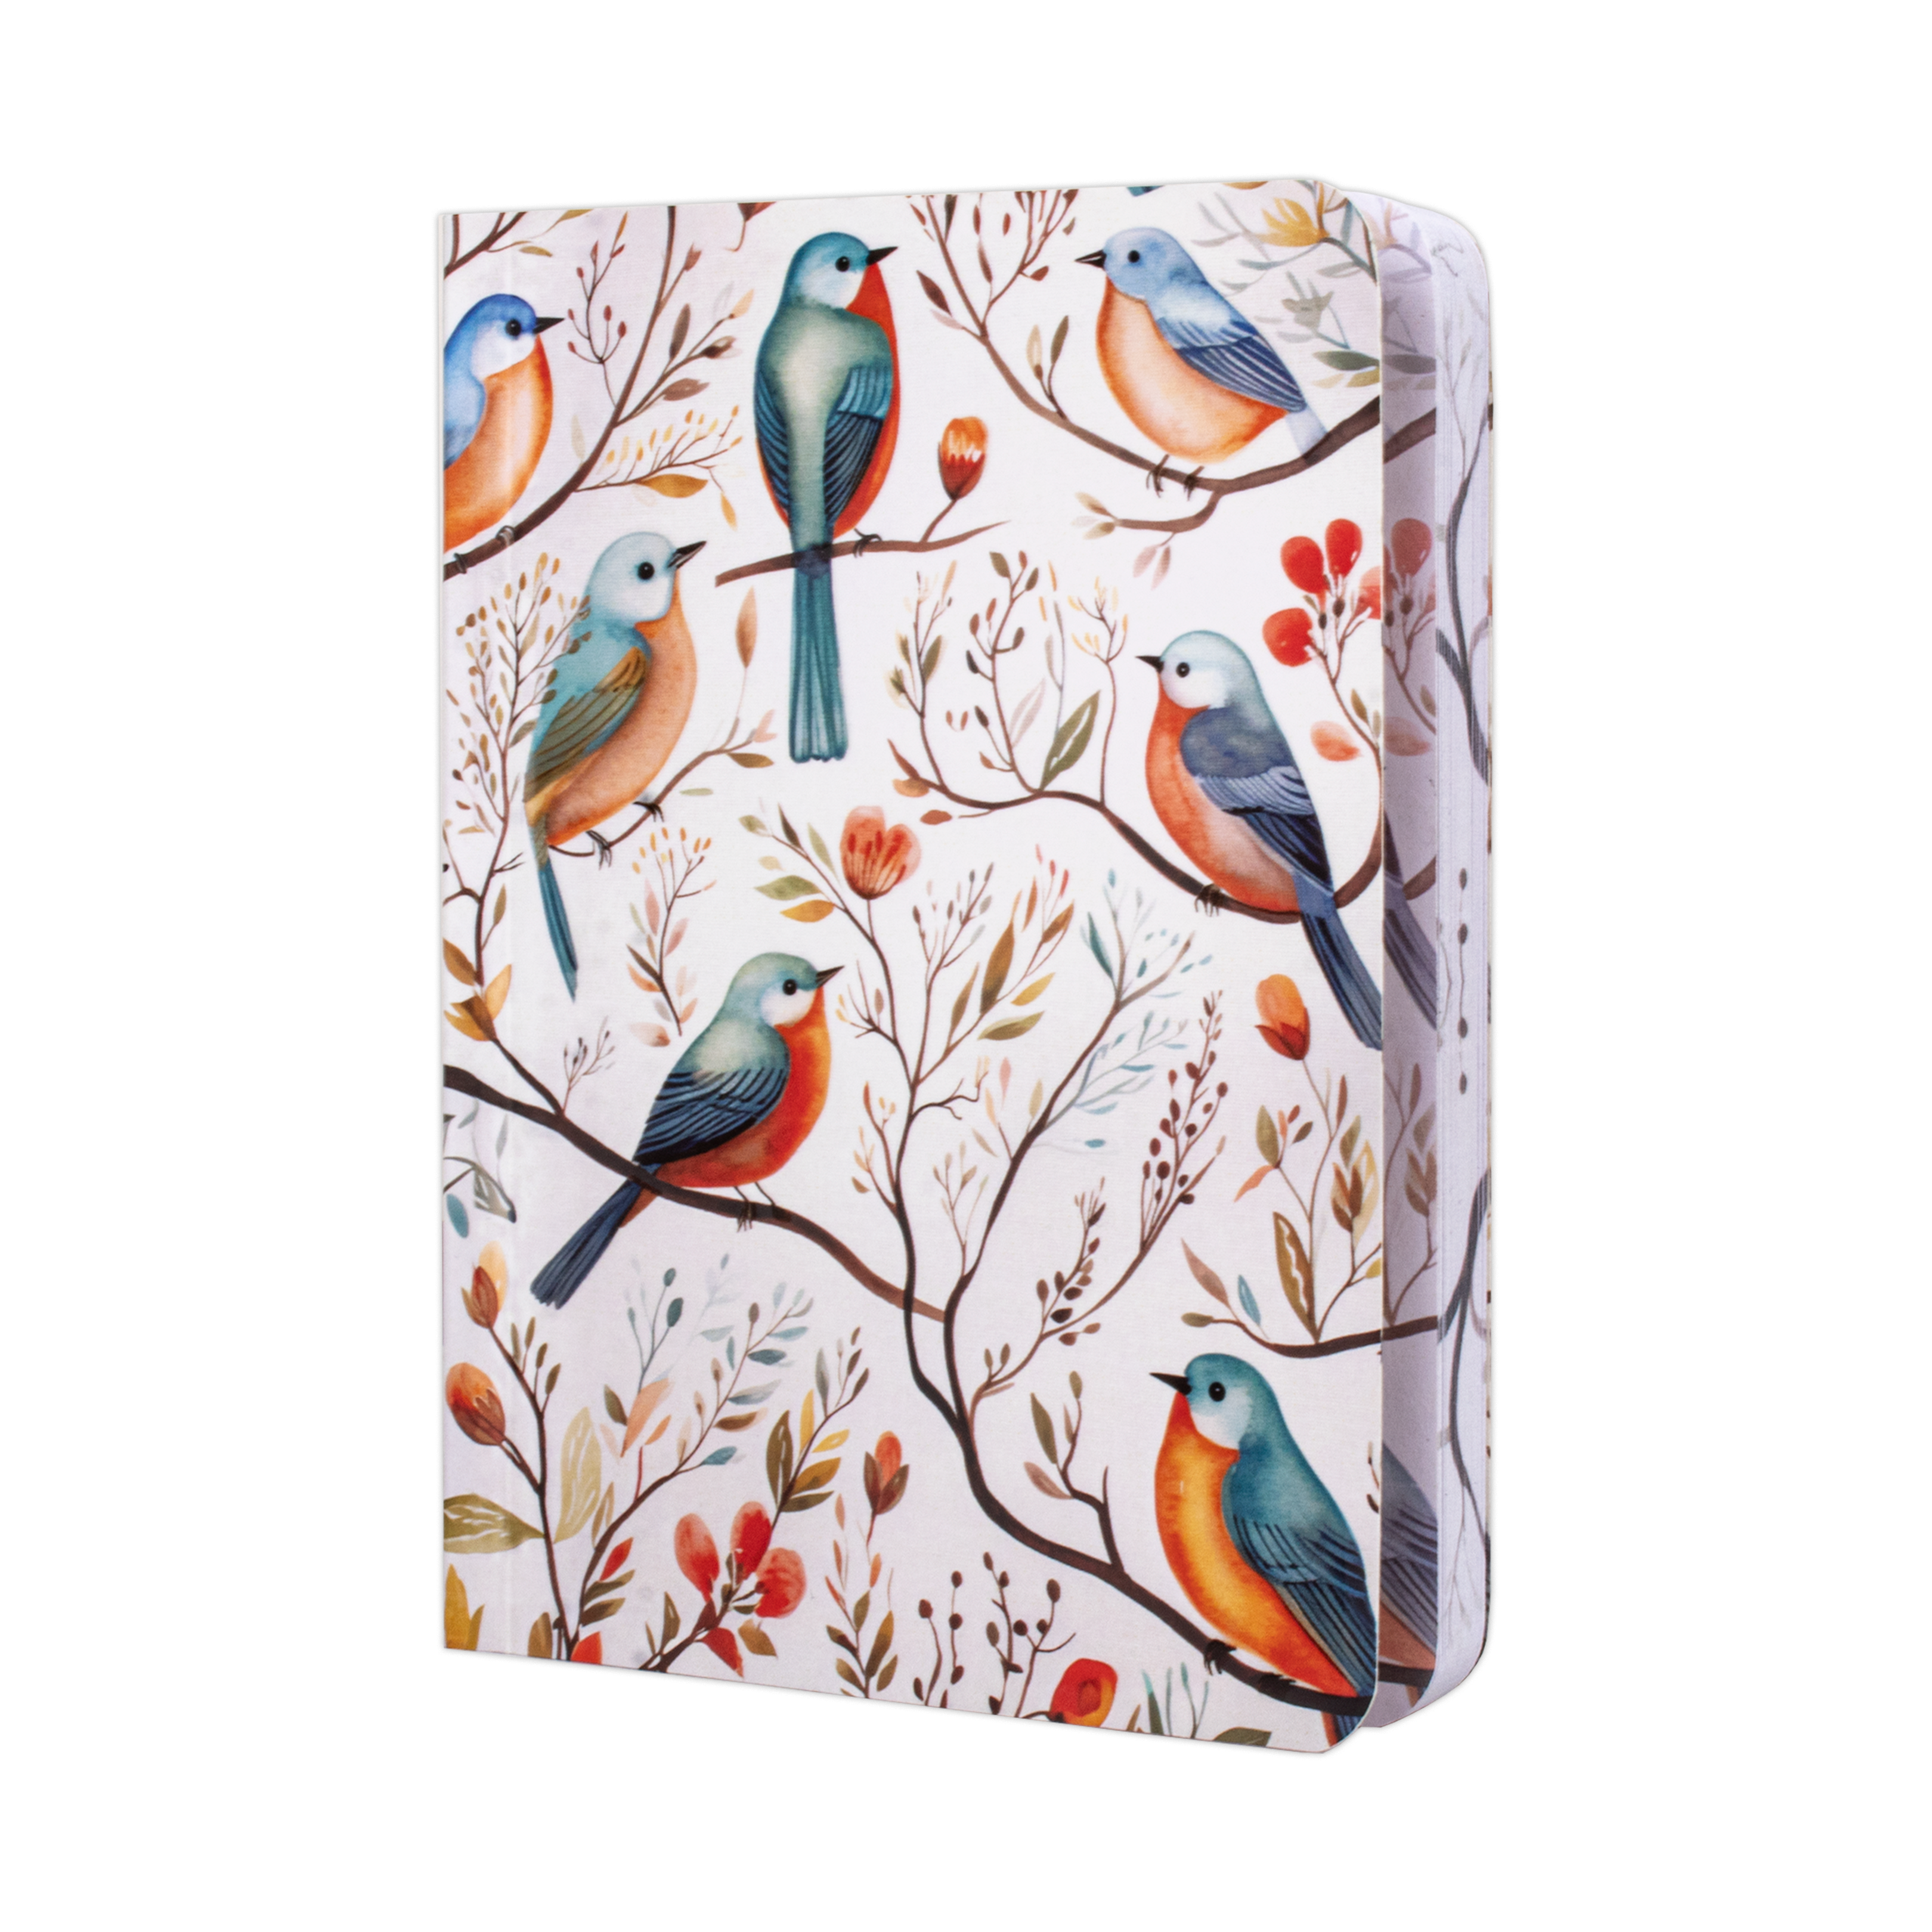 Softbound Ruled Notebook Birds Edge Printed A6 128pages 100gsm